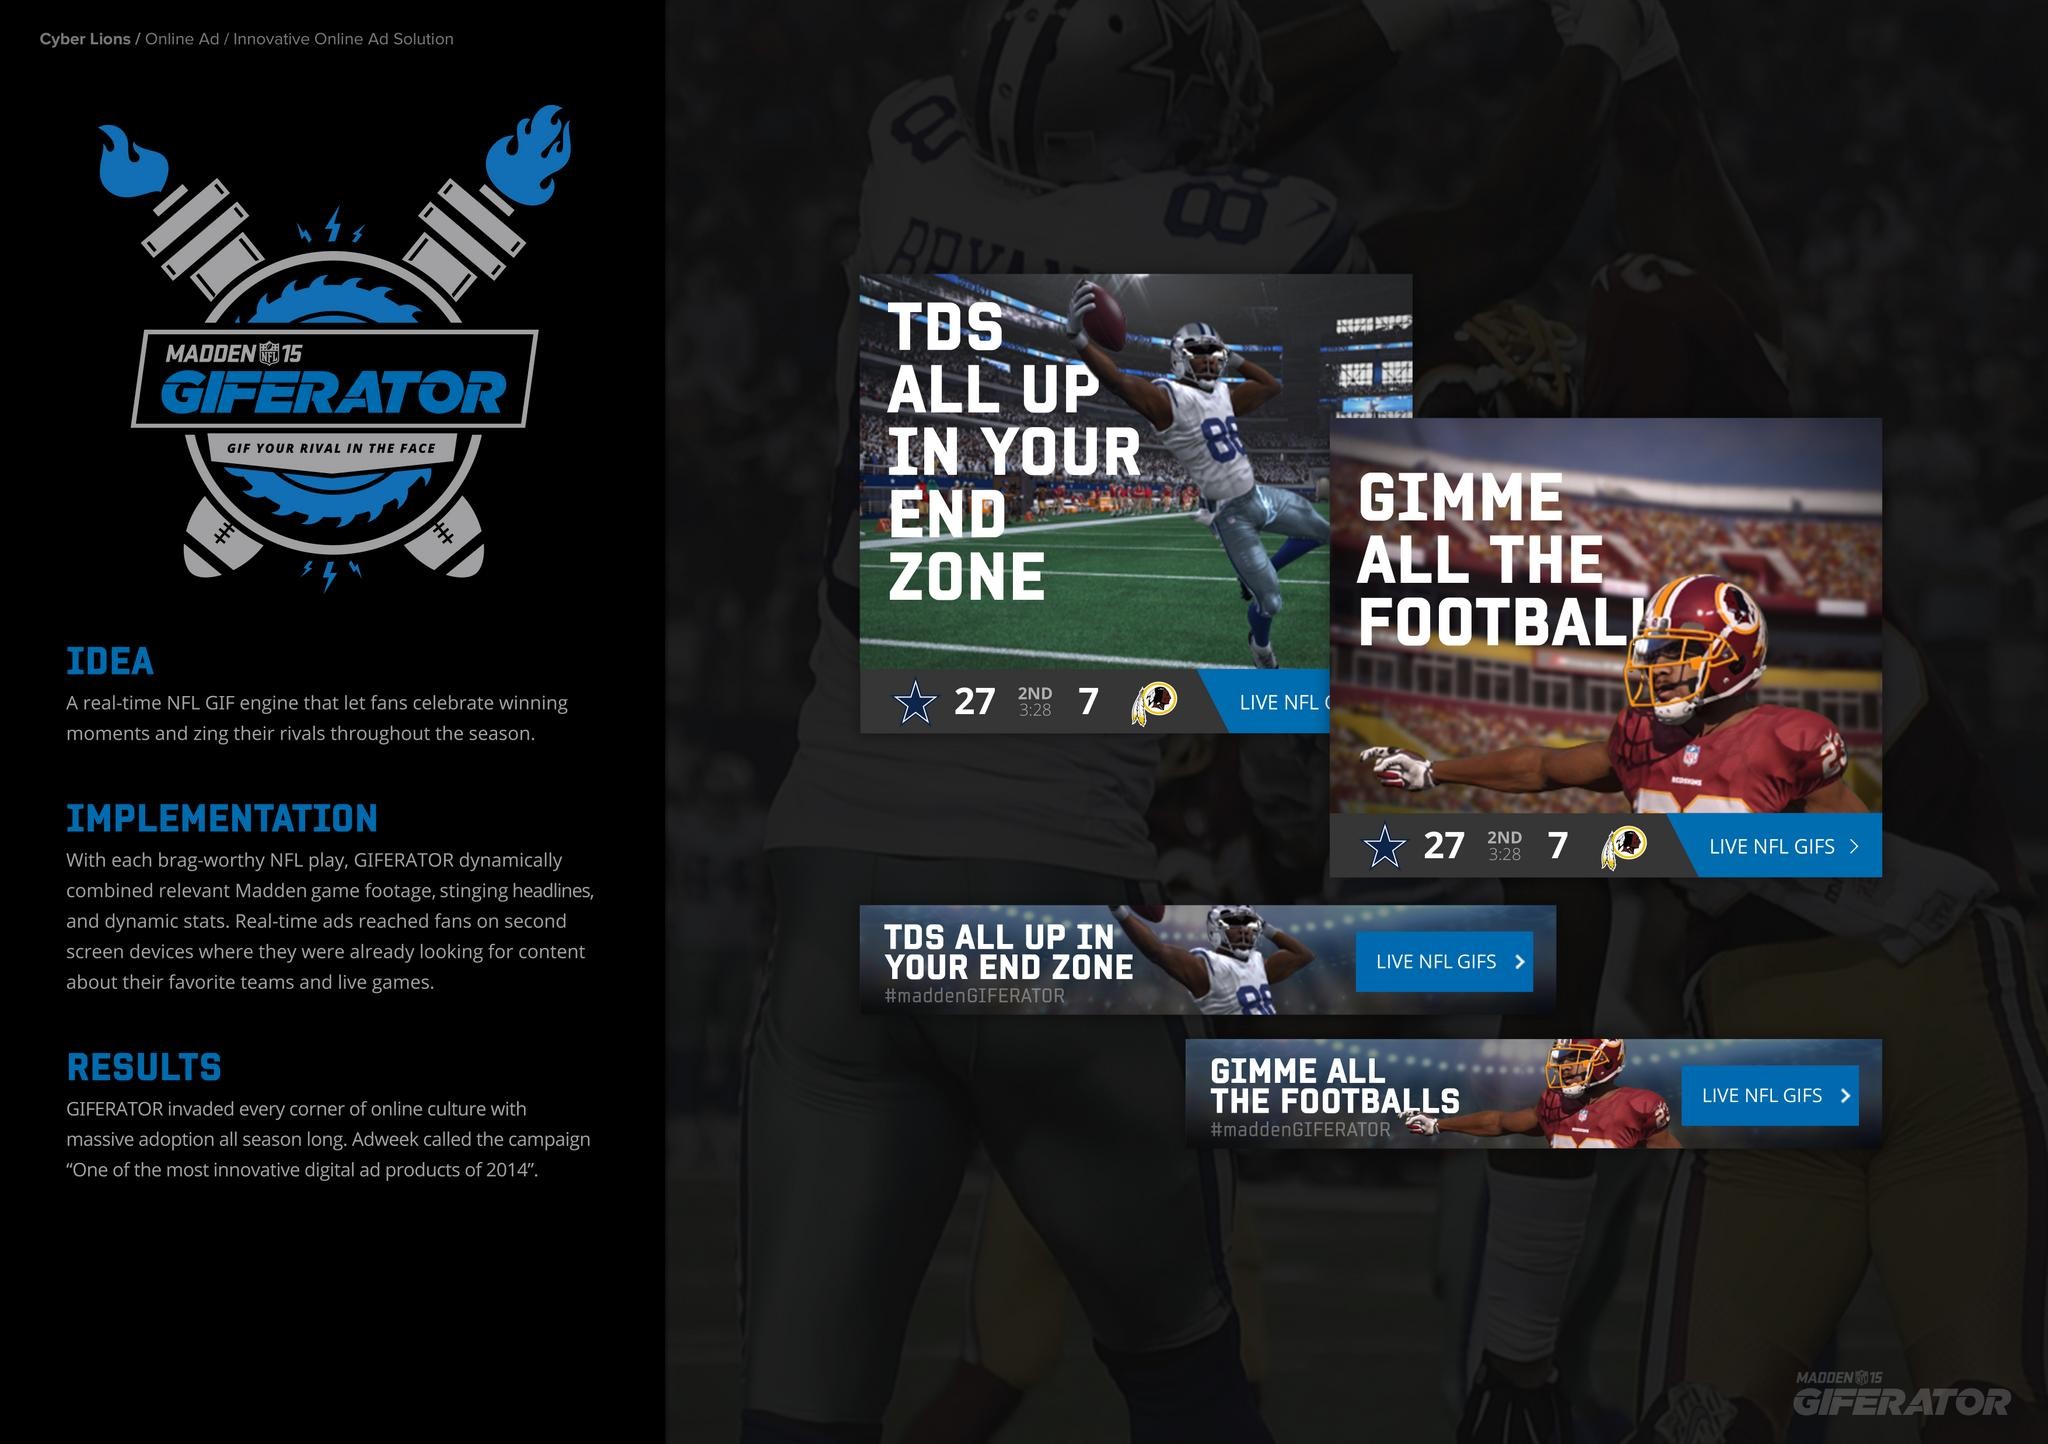 EA SPORTS MADDEN GIFERATOR: AN ART, COPY & CODE PROJECT WITH GOOGLE